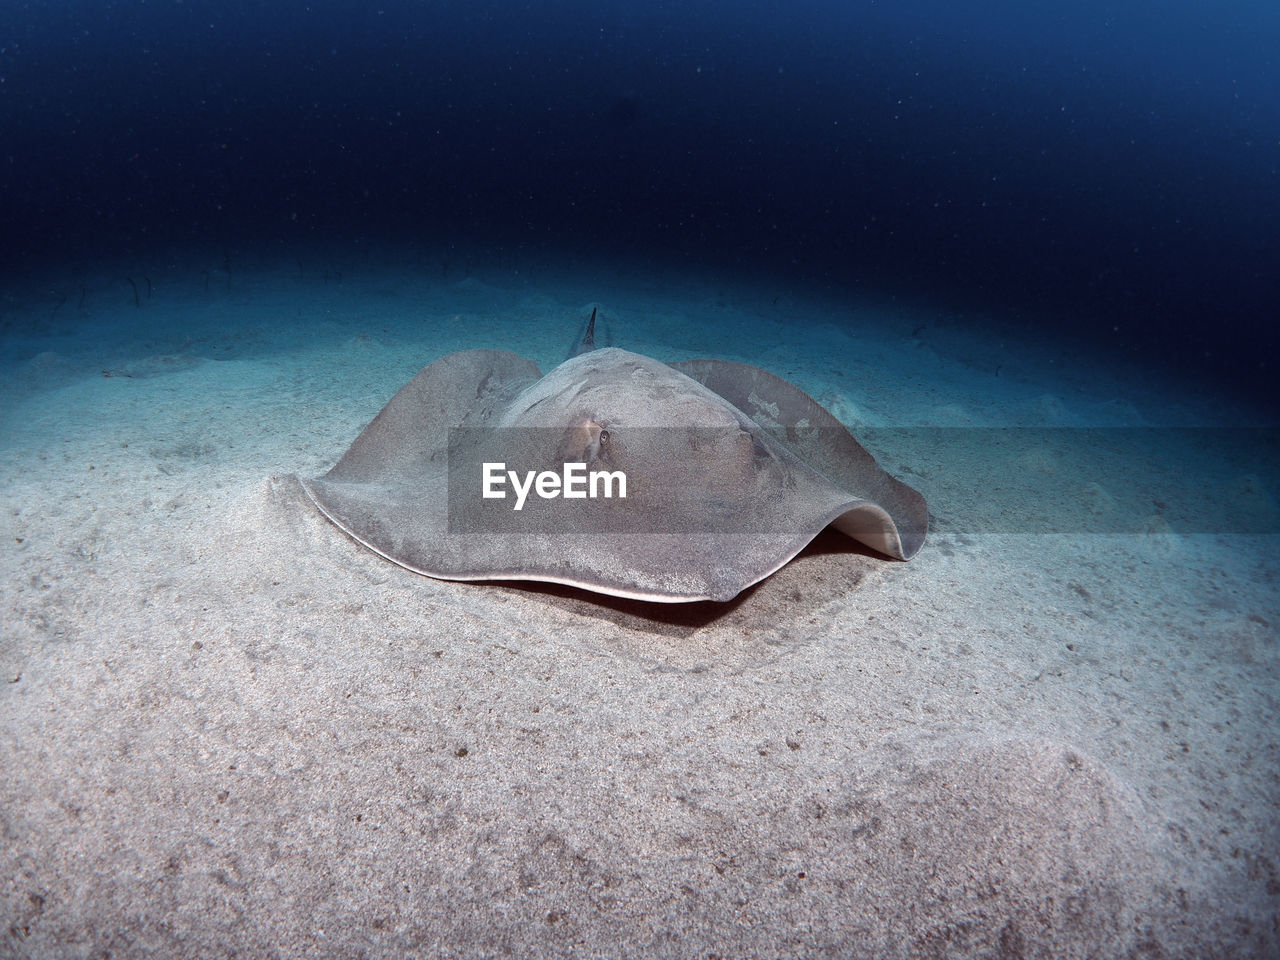 Round stingray swimming in sea digs at the ground